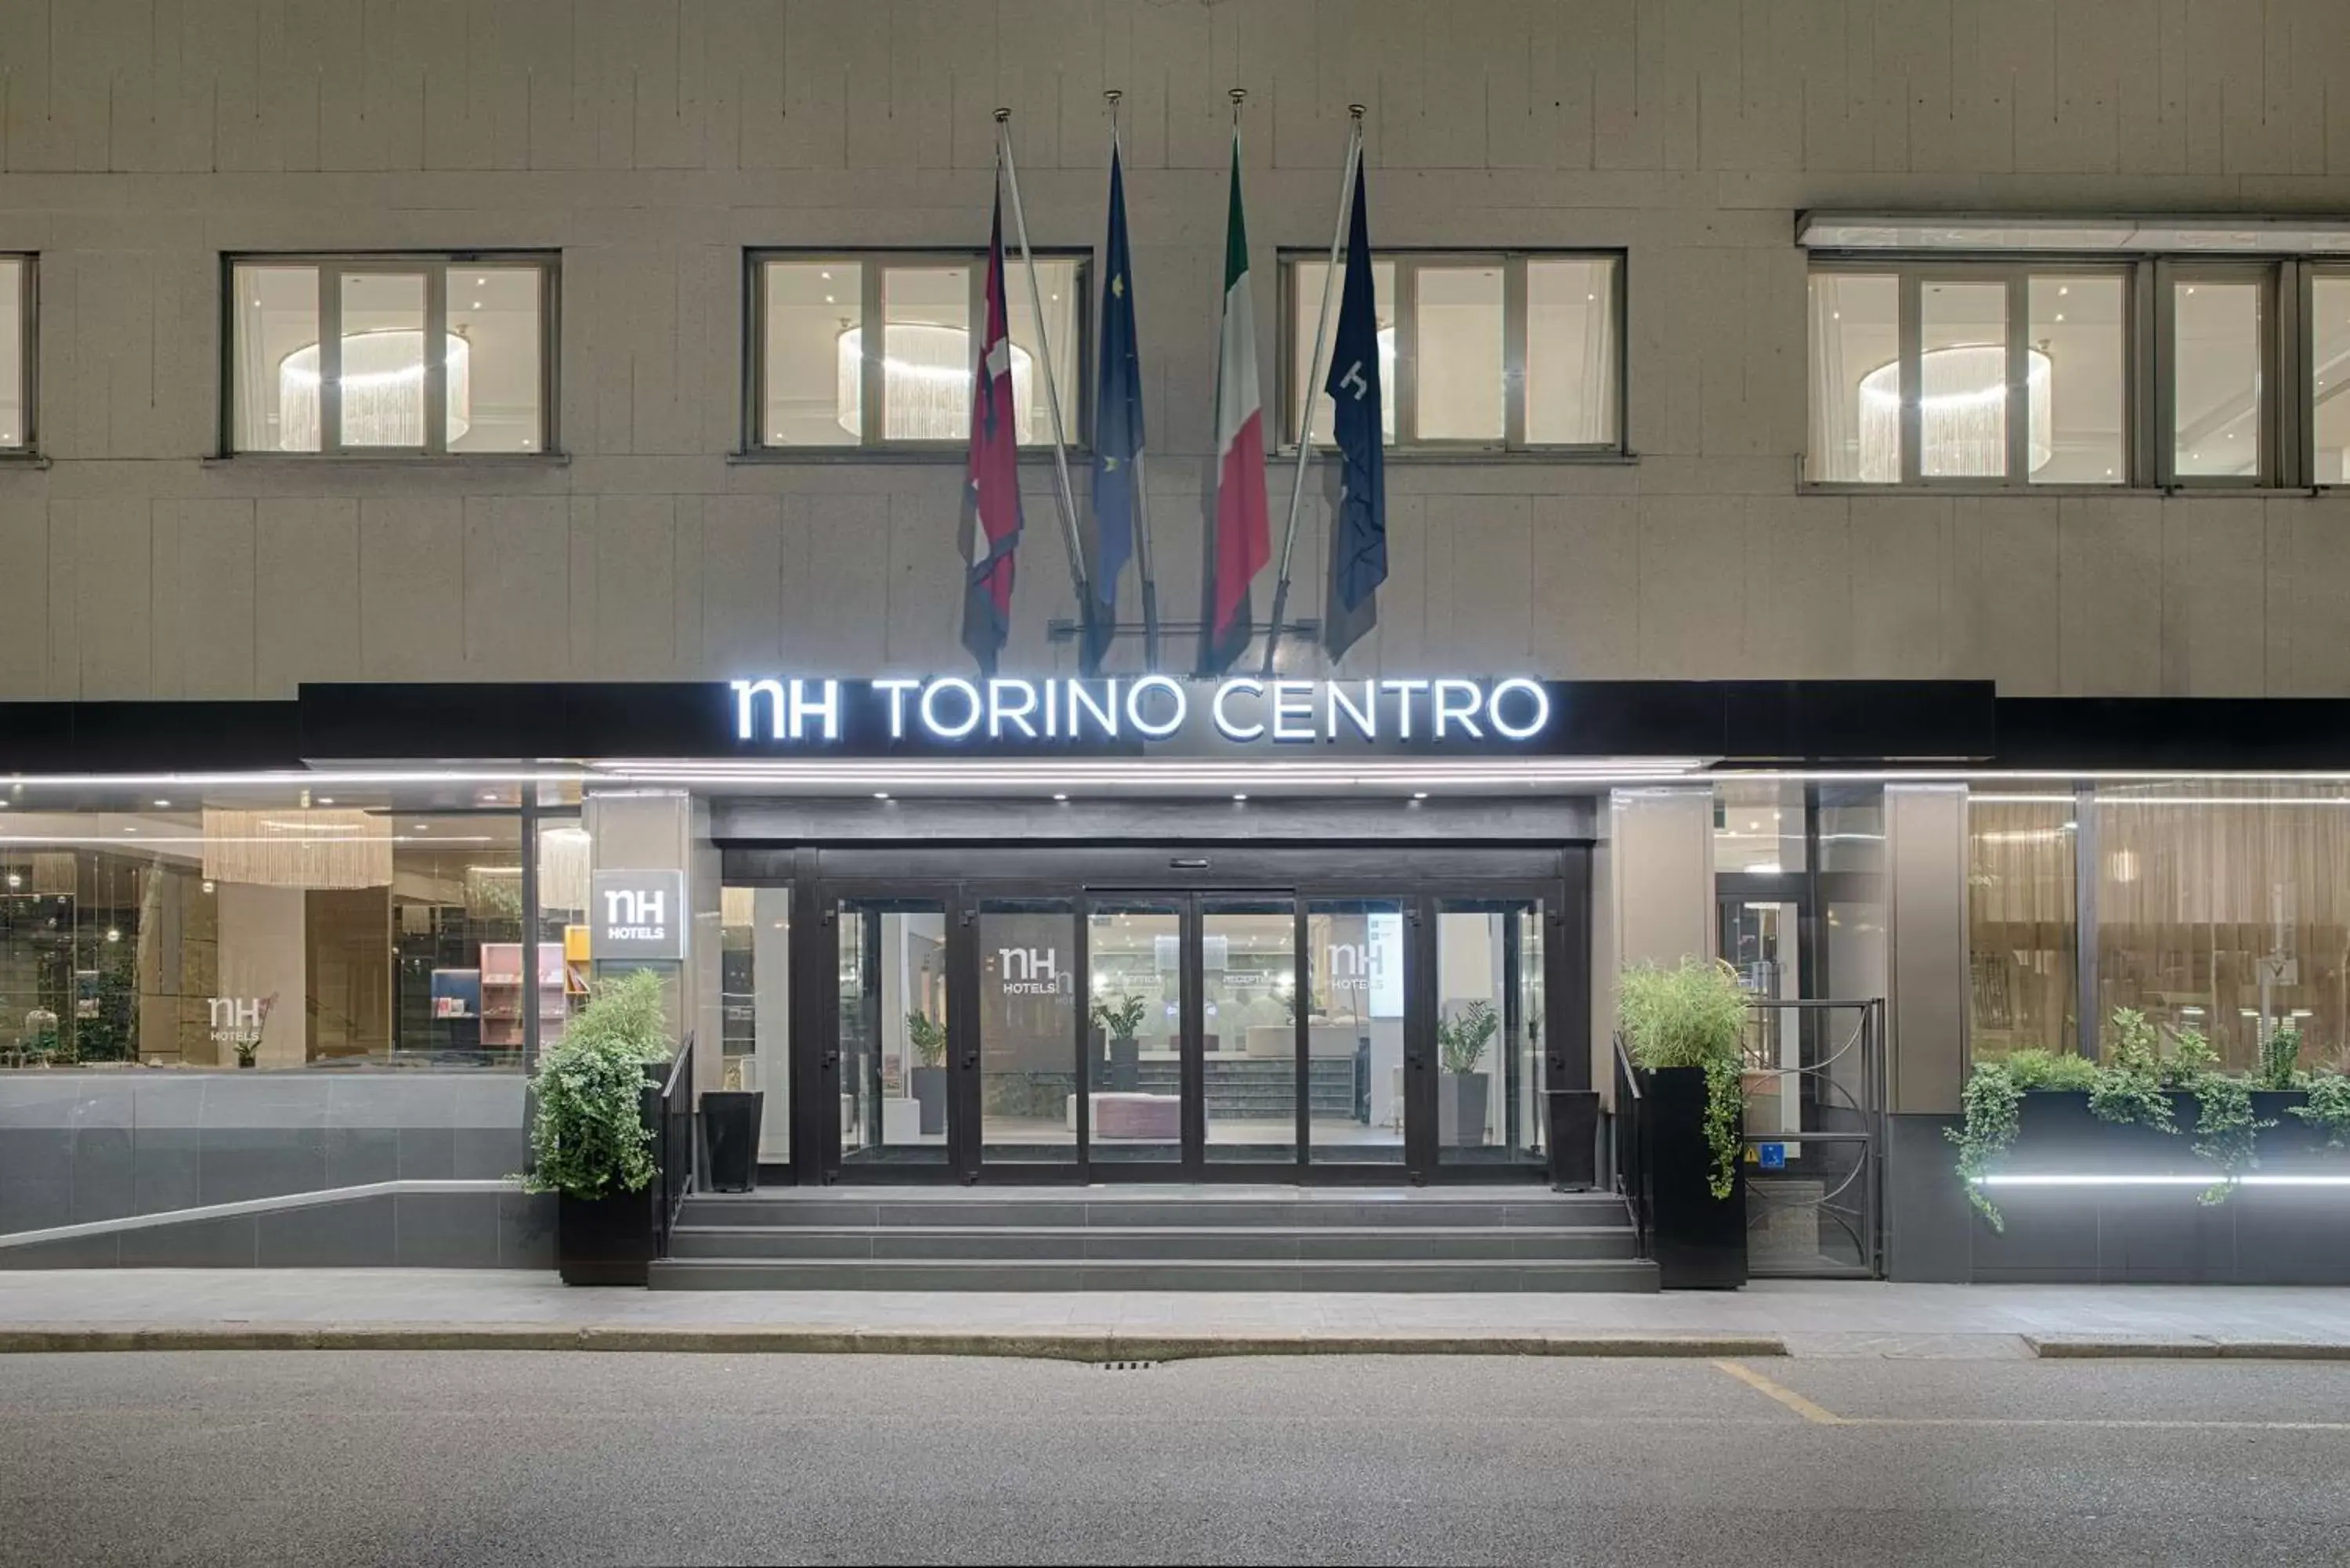 Property building in NH Torino Centro